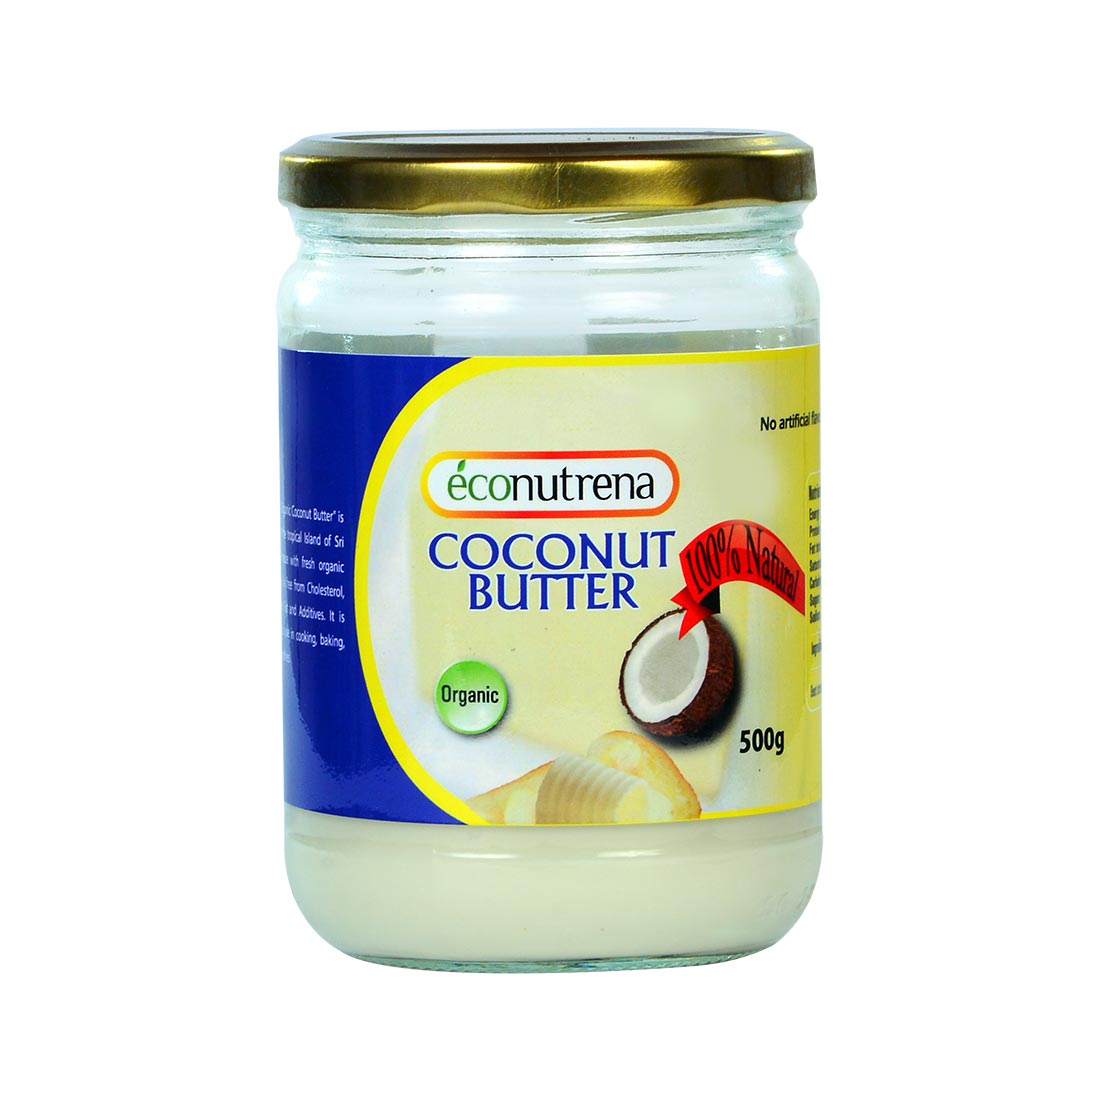 Organic and Fair trade Coconut Butter